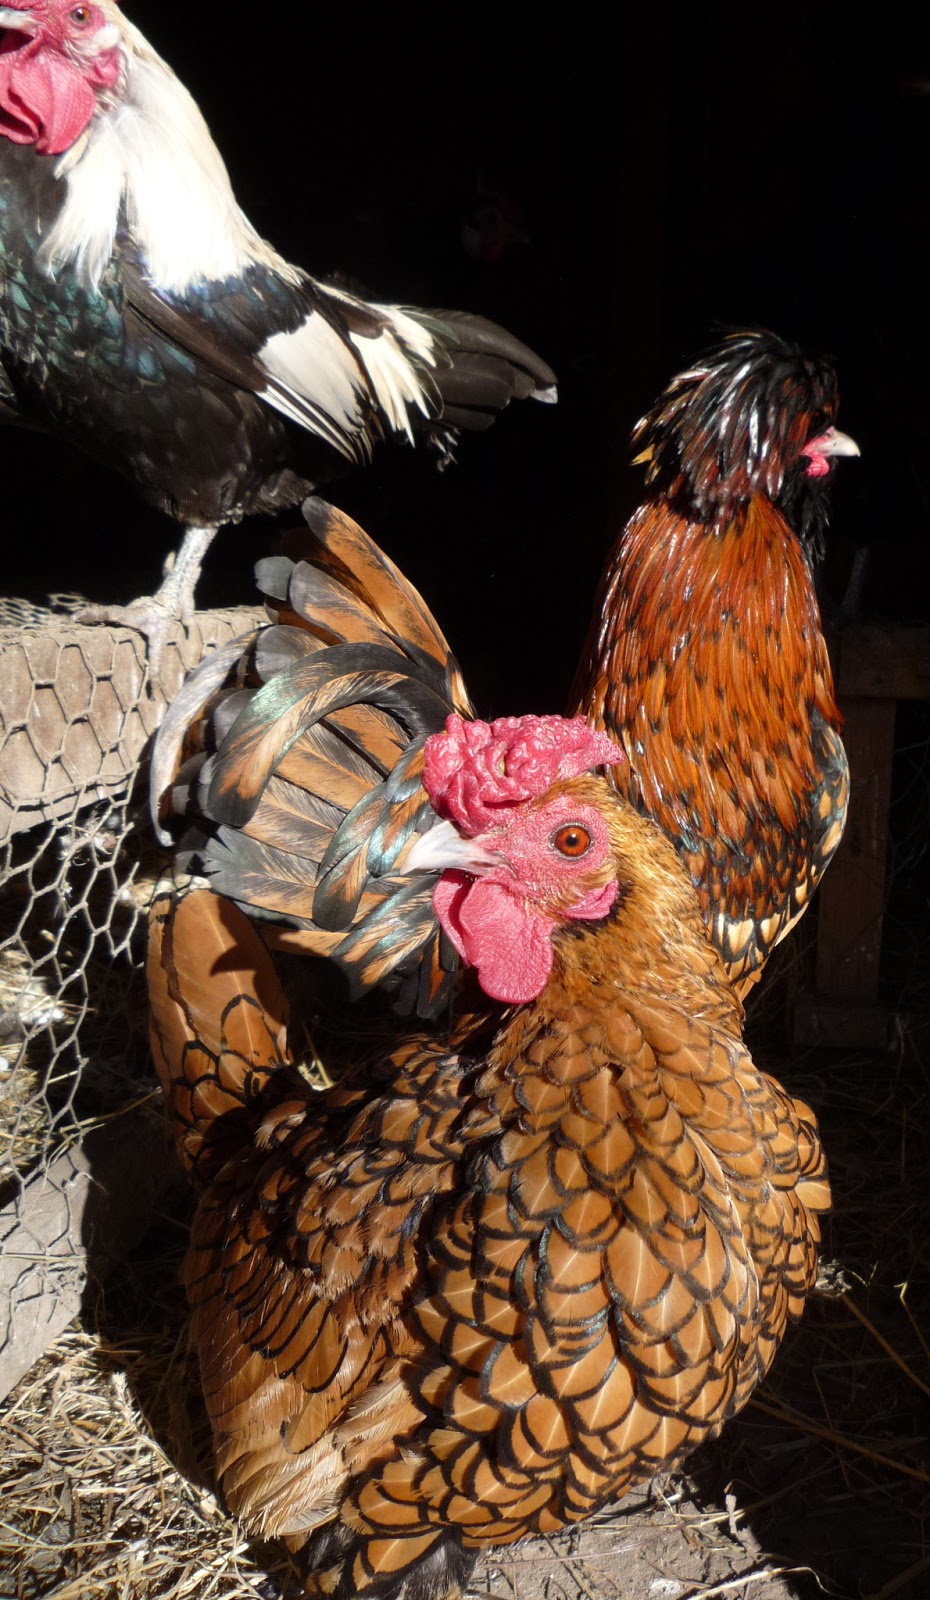 Cruelty Free Feathers 25 Perfect Buff / Gold Feathers From a Buff Orpington  Rooster 